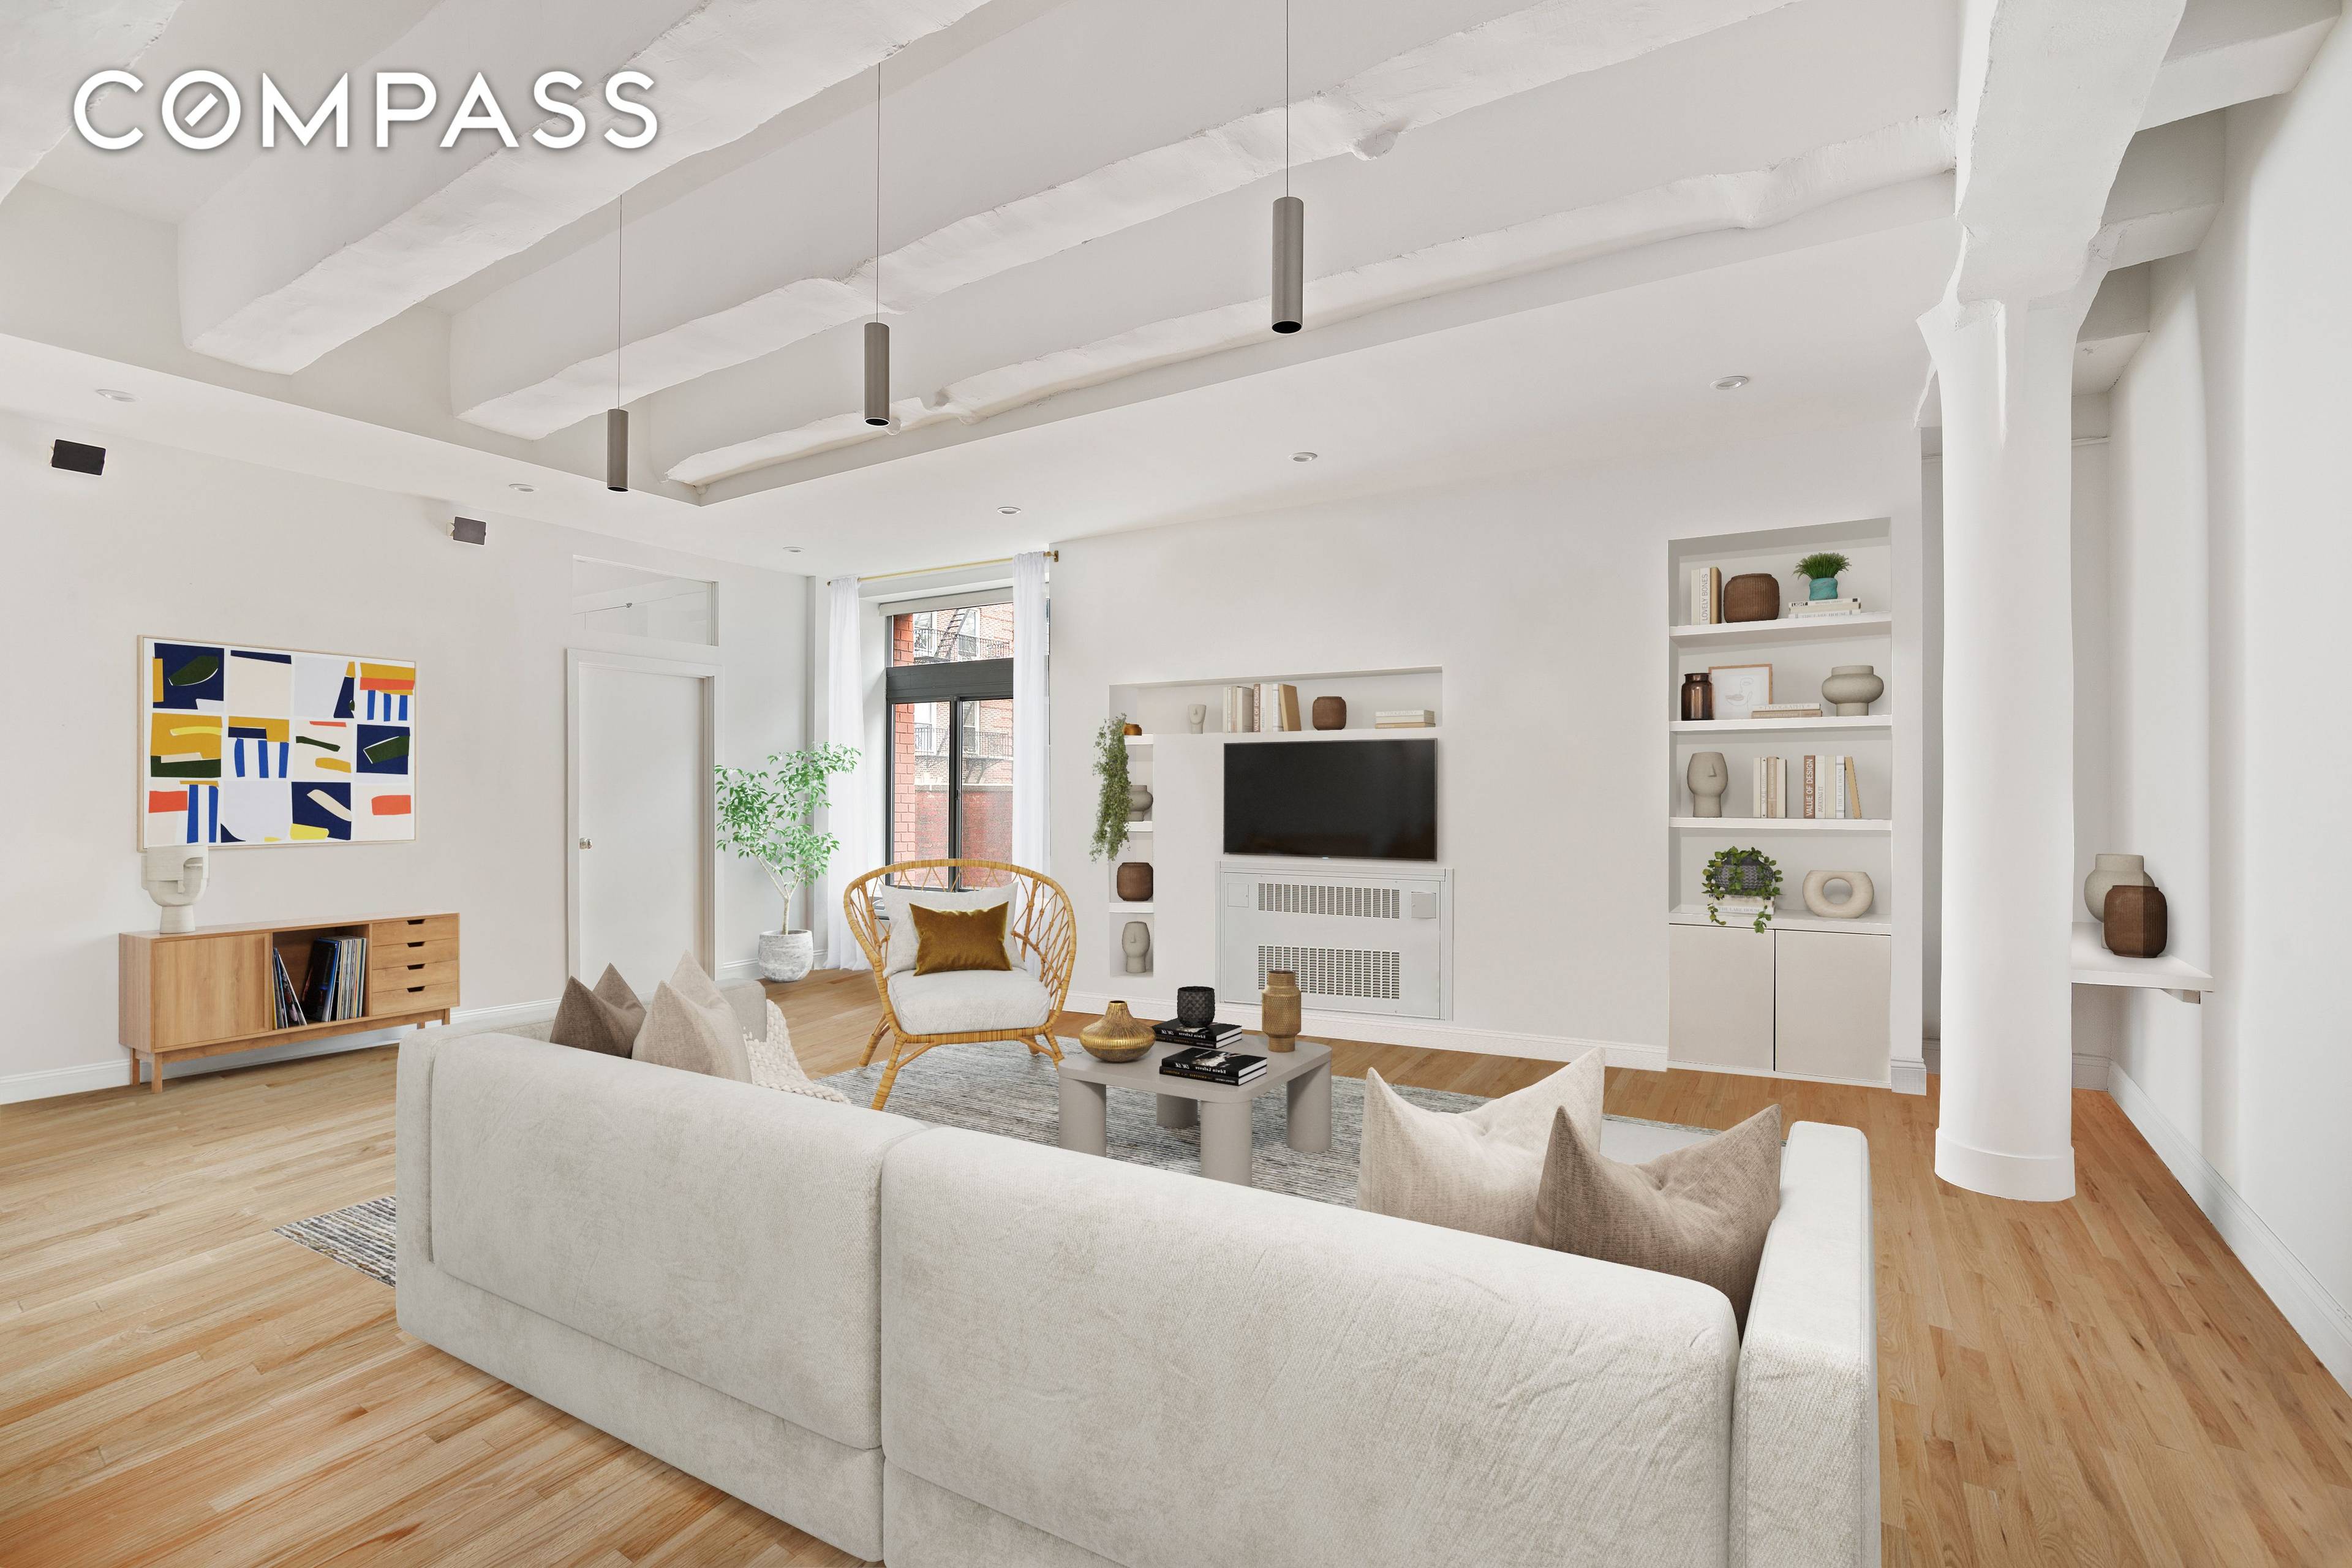 Unique opportunity to combine two side by side condominium units to create an expansive loft in the heart of Nolita !